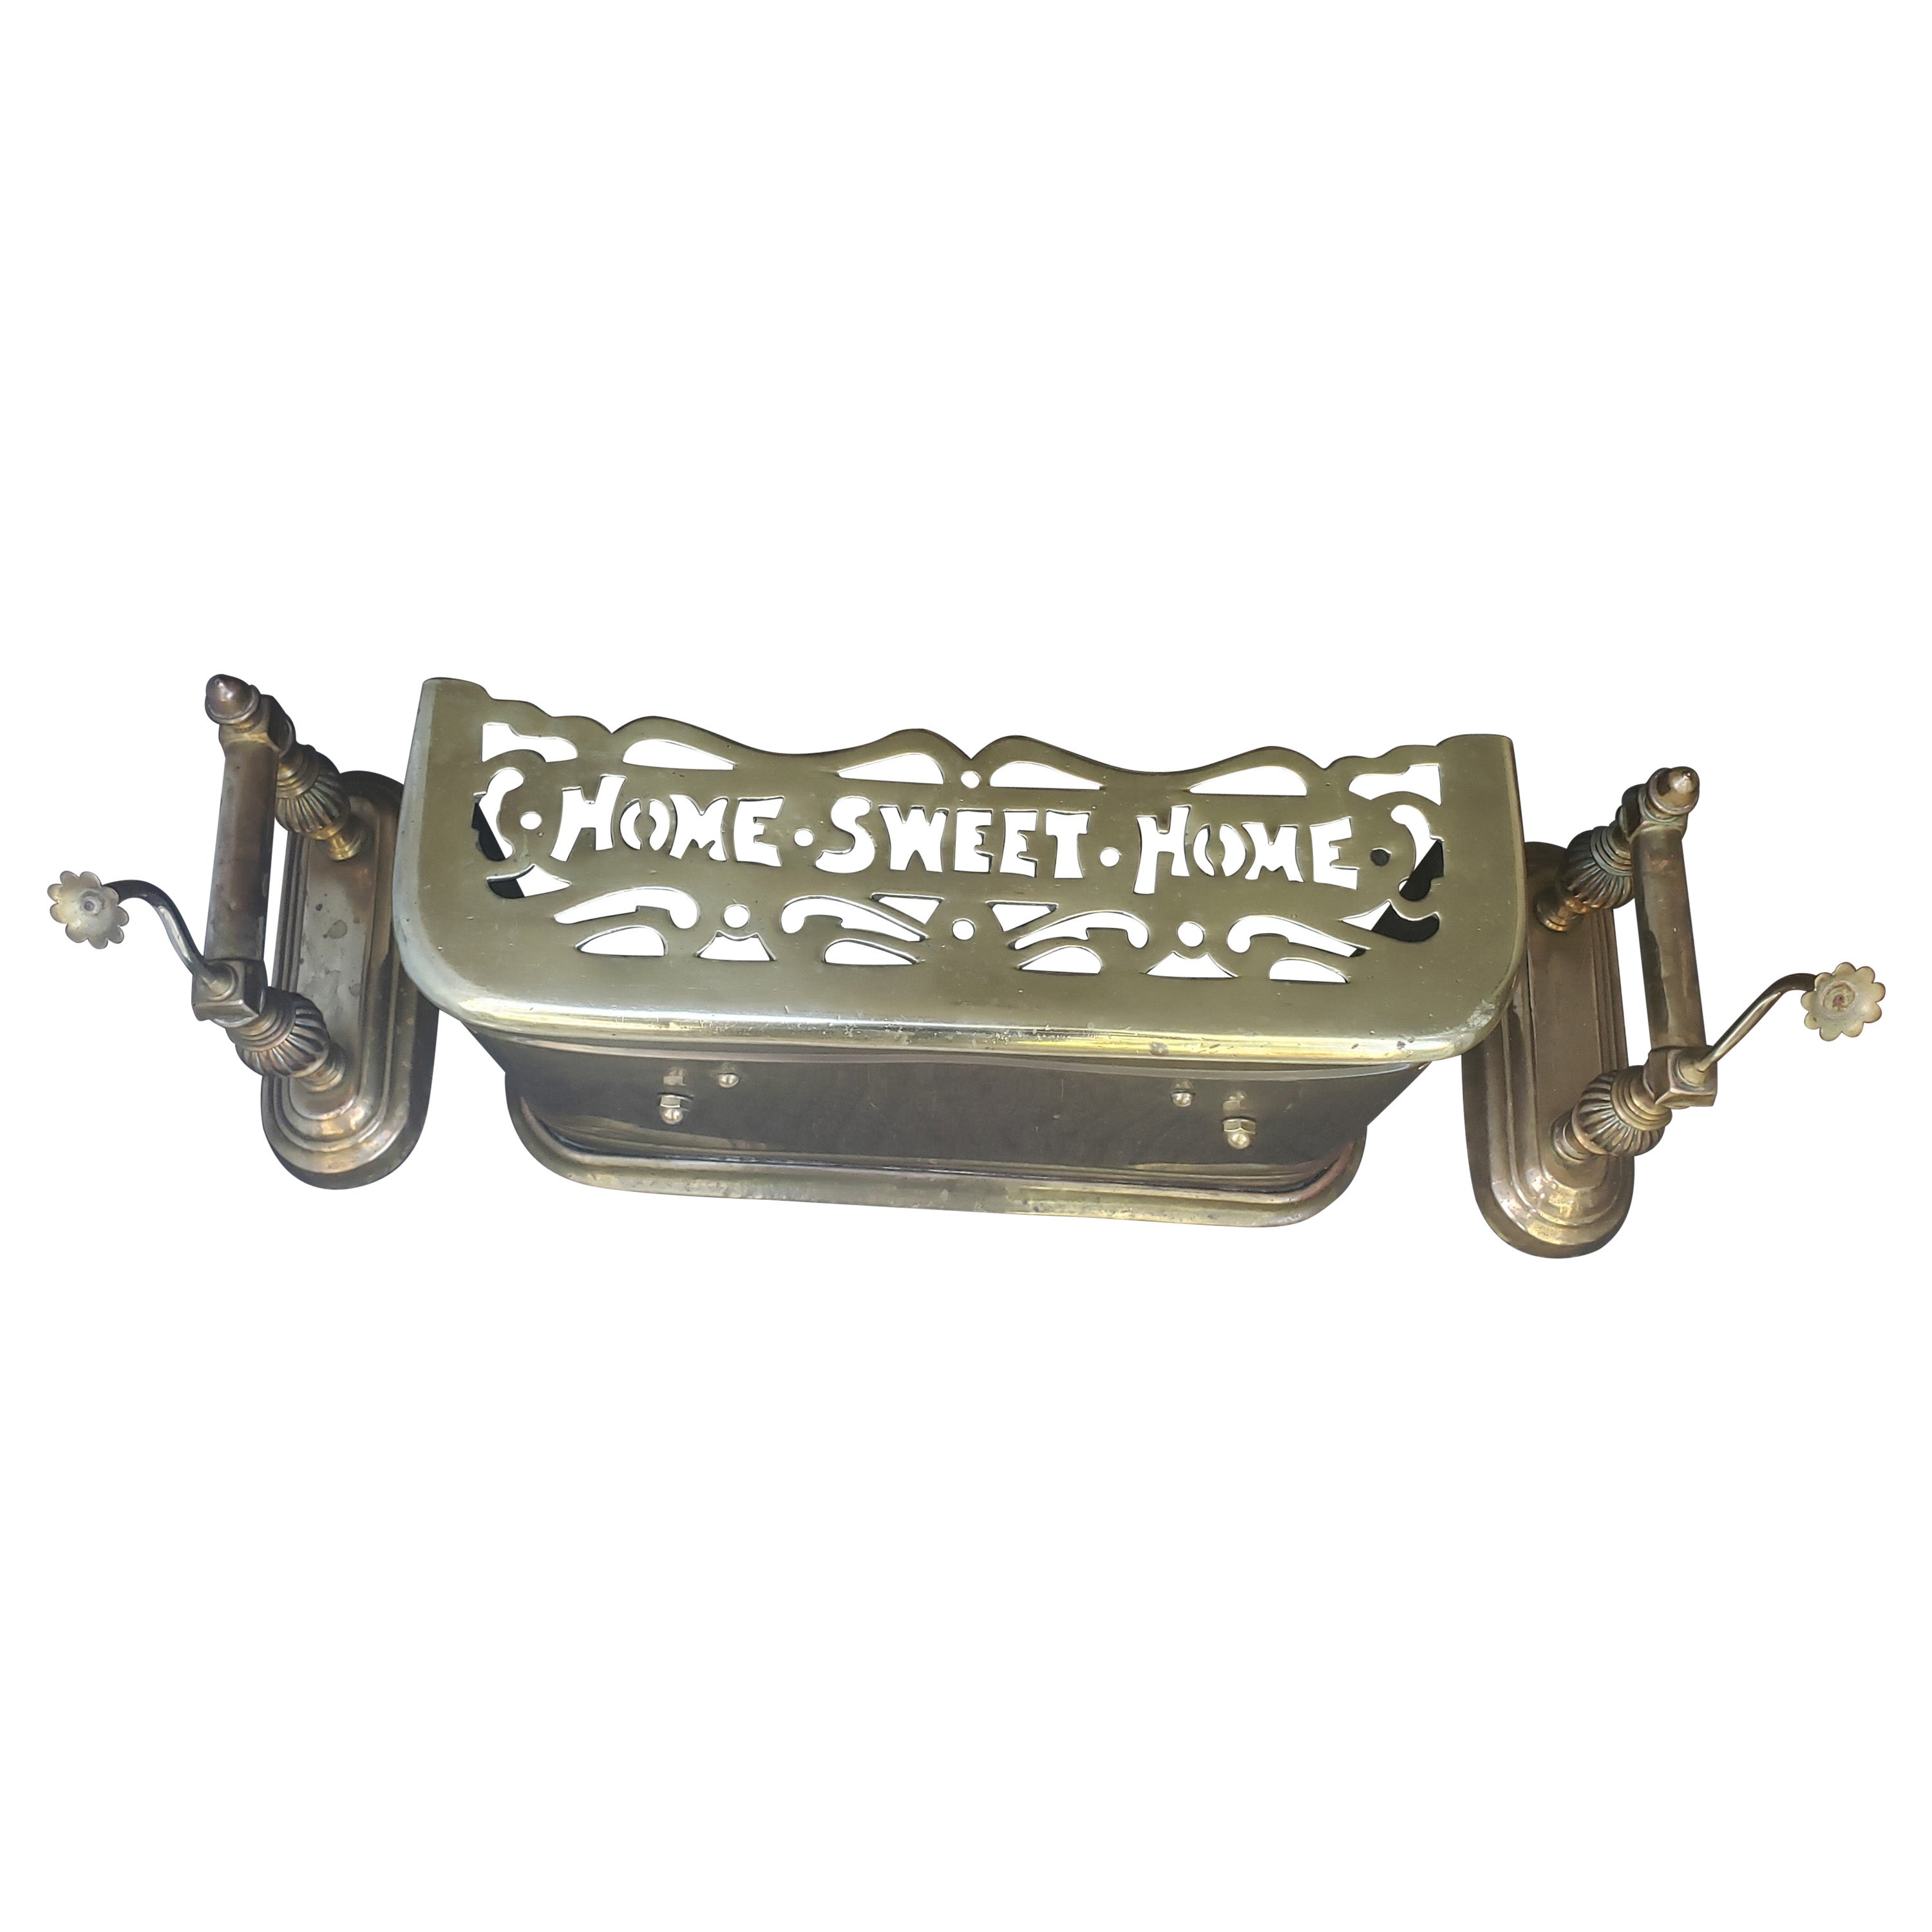 "Home Sweet Home" Solid Brass Fireplace Fender and Fireplace Dogs Set For Sale